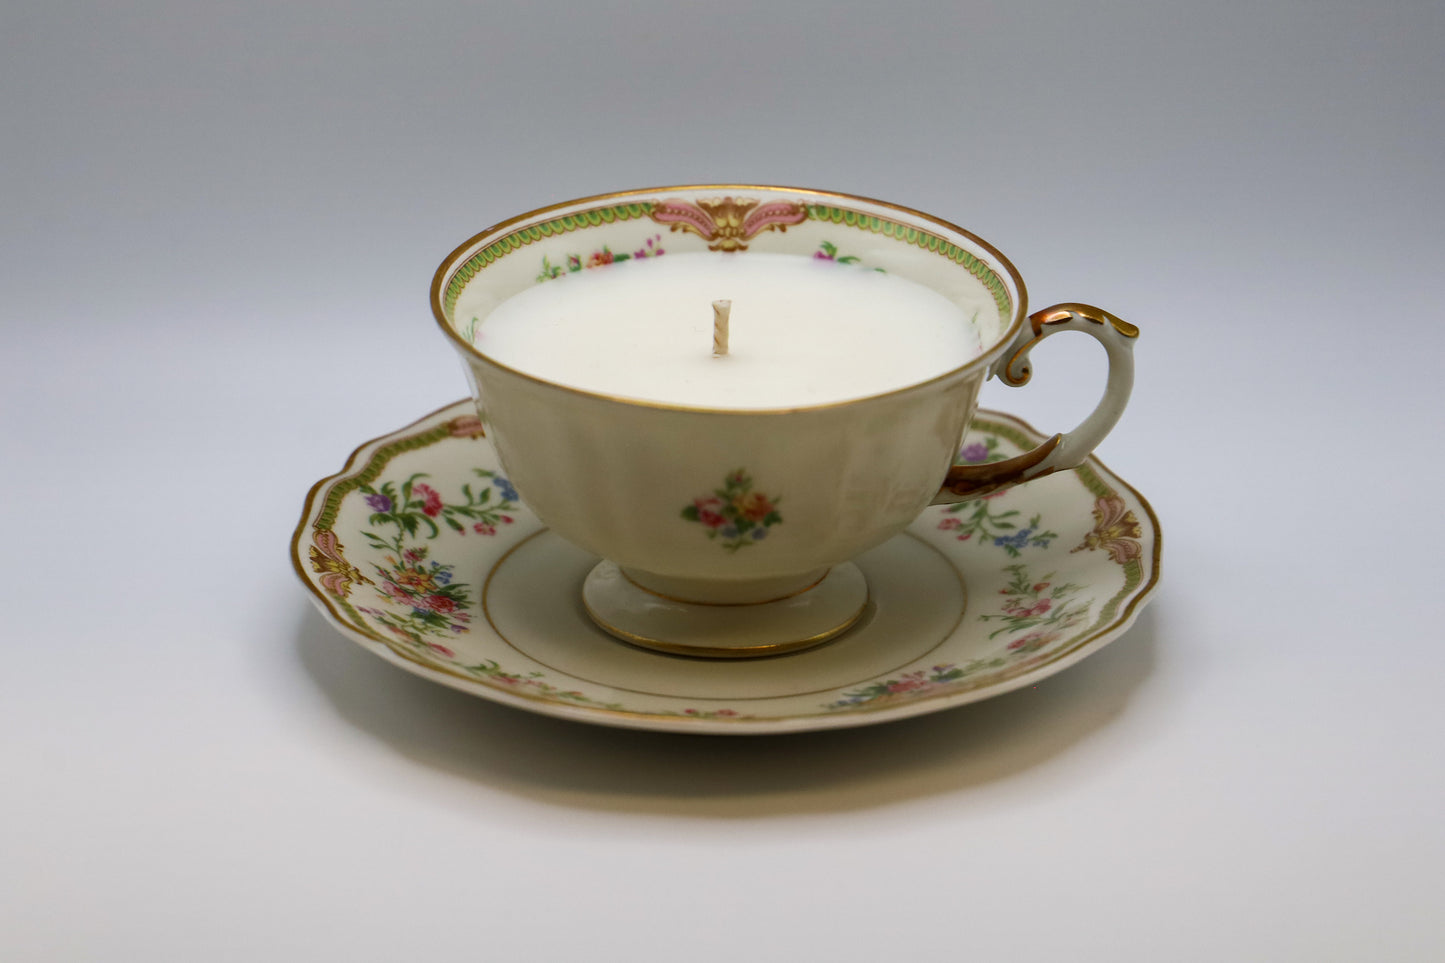 Aida tea cup made in Bavaria with Pink Sugar Crystals scented soy candle.